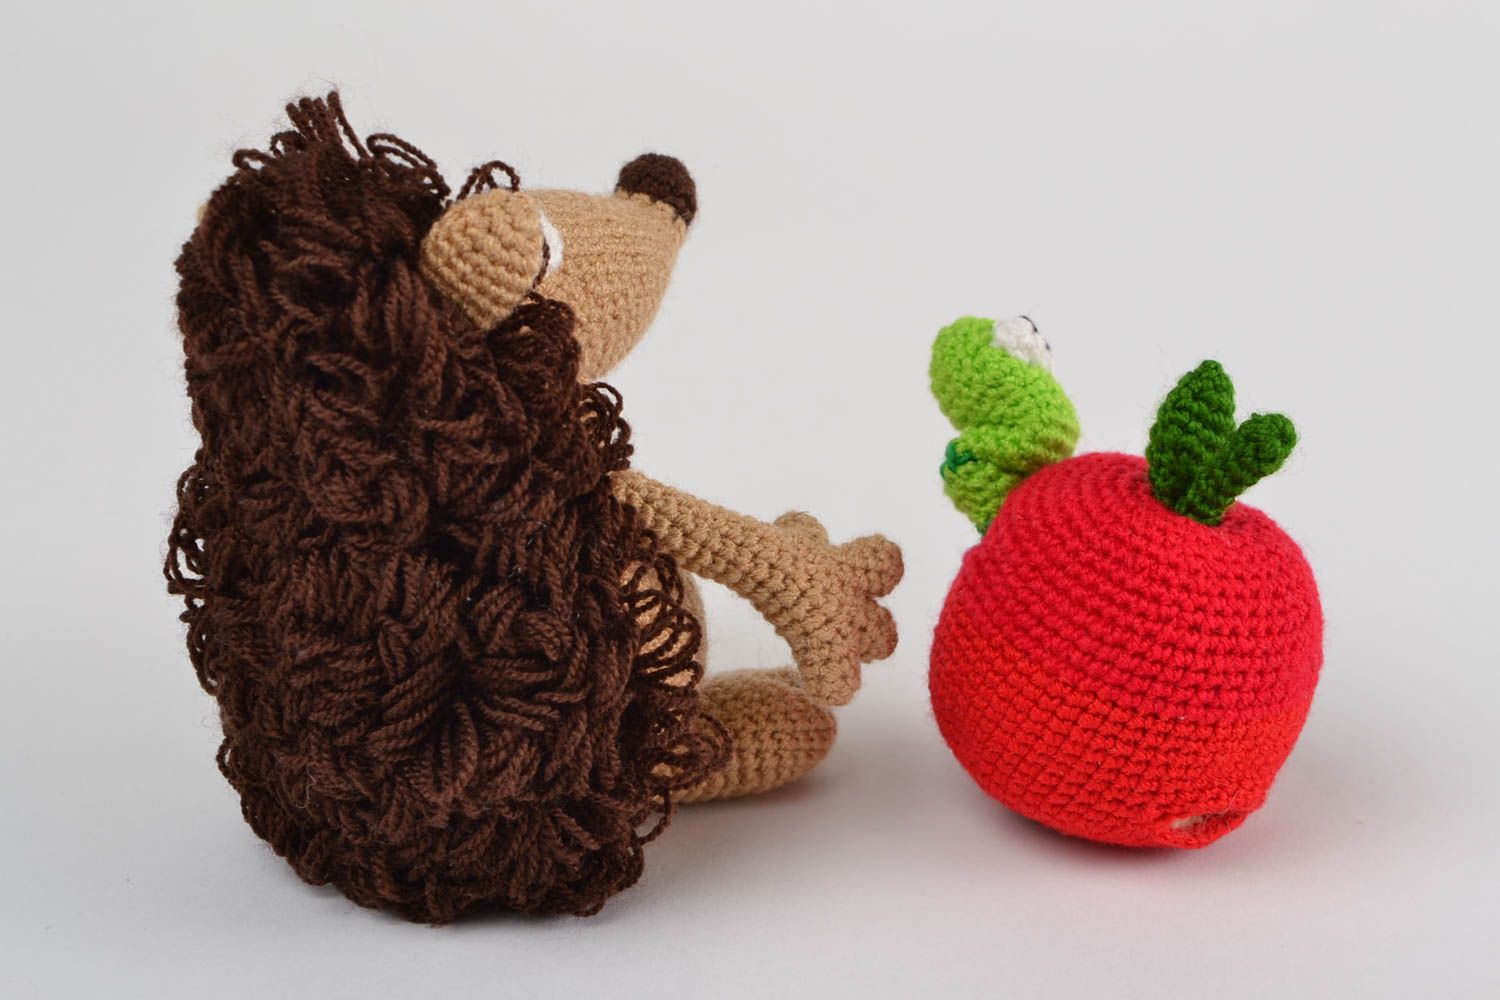 Decorative soft crocheted handmade toys hedgehog with apple and worm 3 pieces photo 5